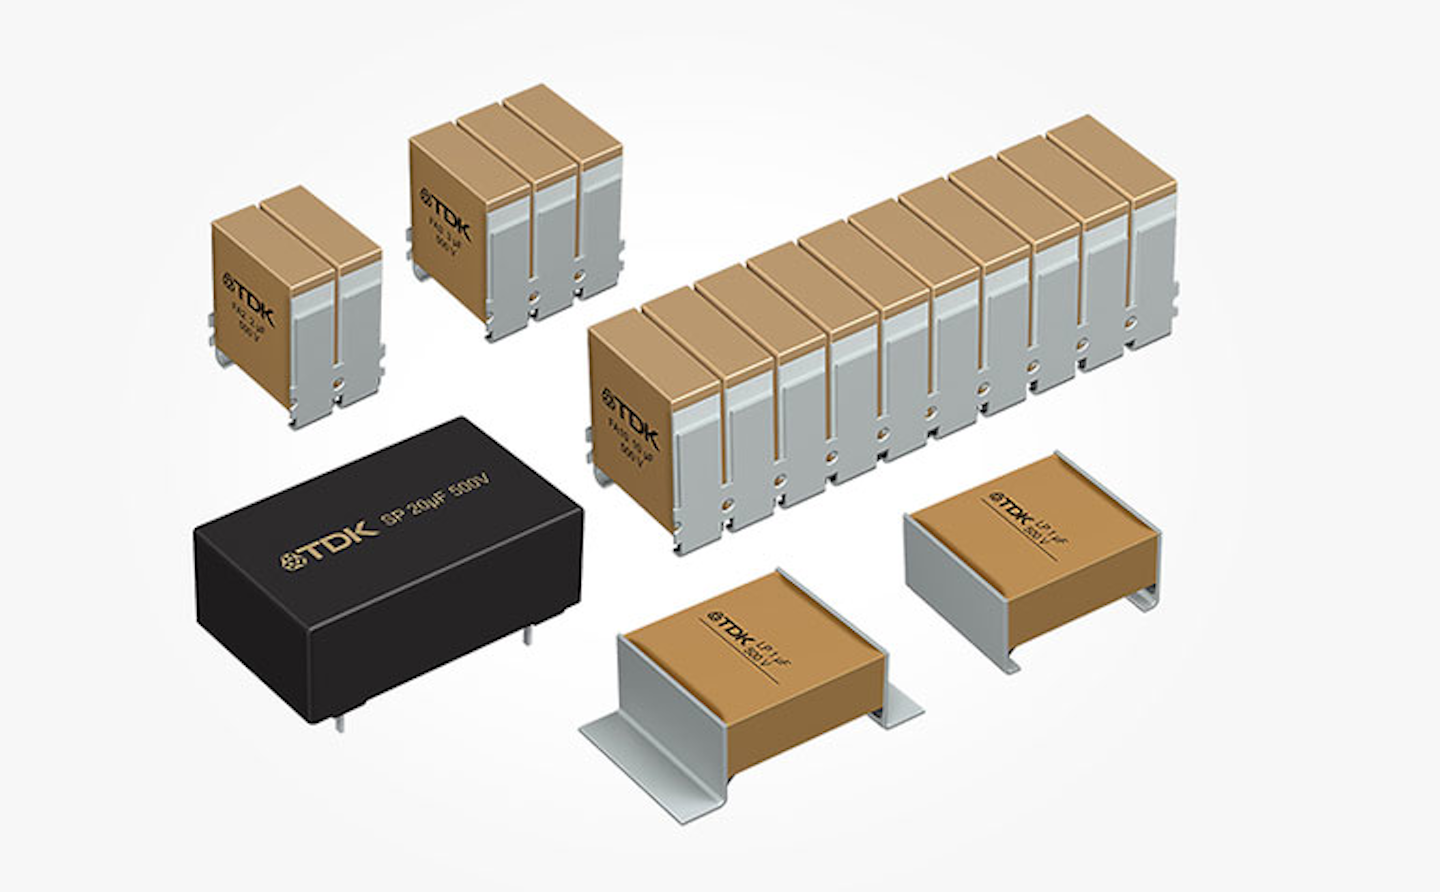 9. In addition to a special dielectric, TDK’s CeraLink ceramic capacitors come in tightly stacked configurations to lower inductance and equivalent series resistance (ESR). (Courtesy of TDK)